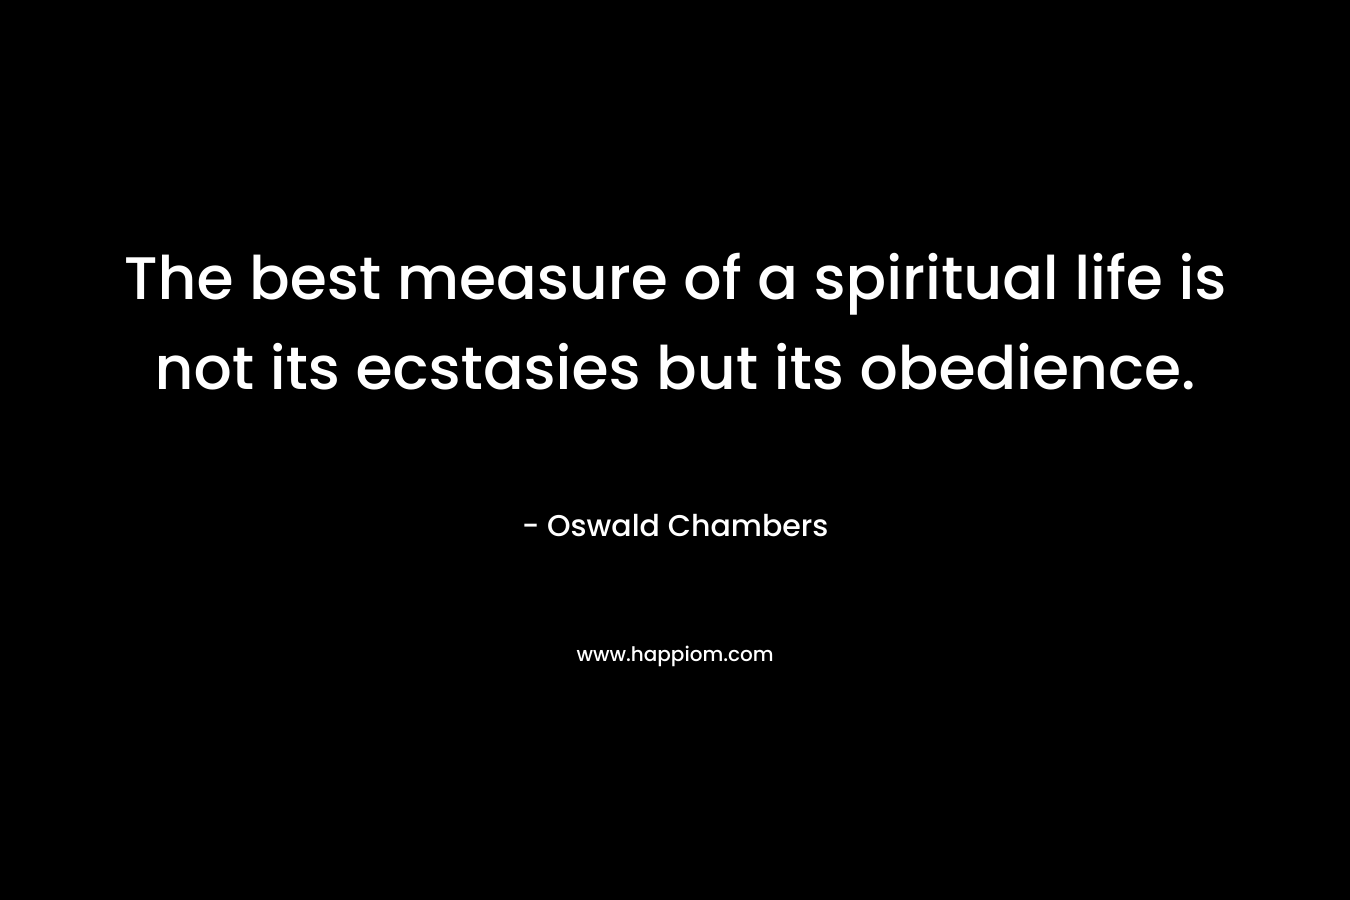 The best measure of a spiritual life is not its ecstasies but its obedience. – Oswald Chambers